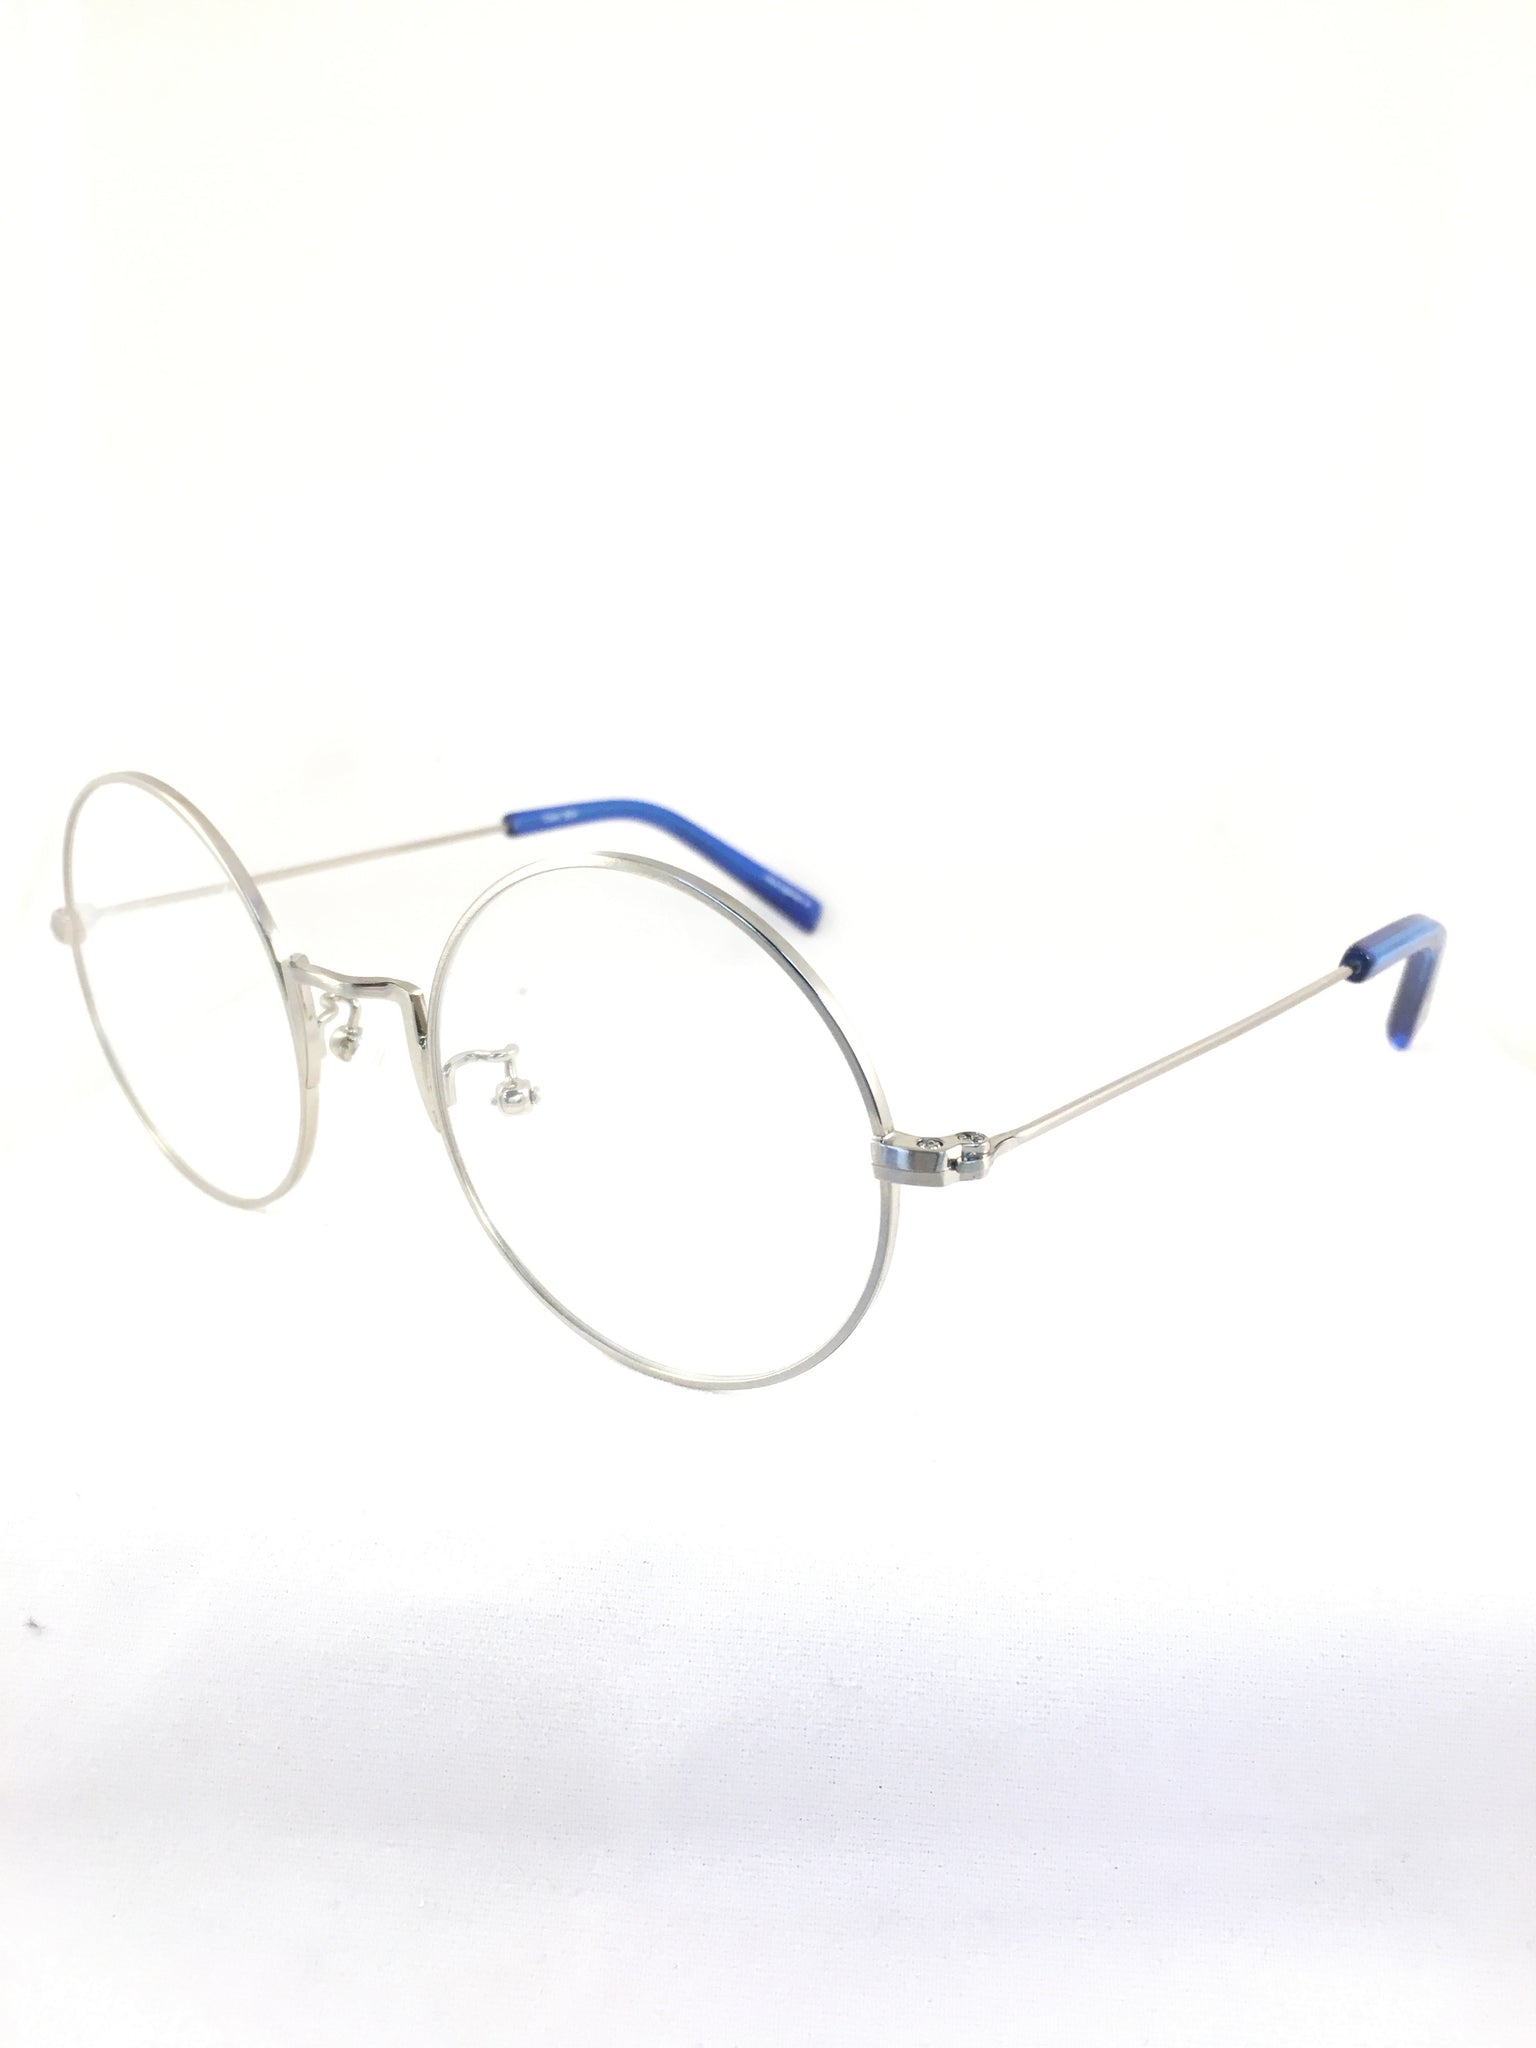 Gandhi's Glasses. Gandhi's glasses were expected to fetch… | by Jackson  Gilbert | Medium